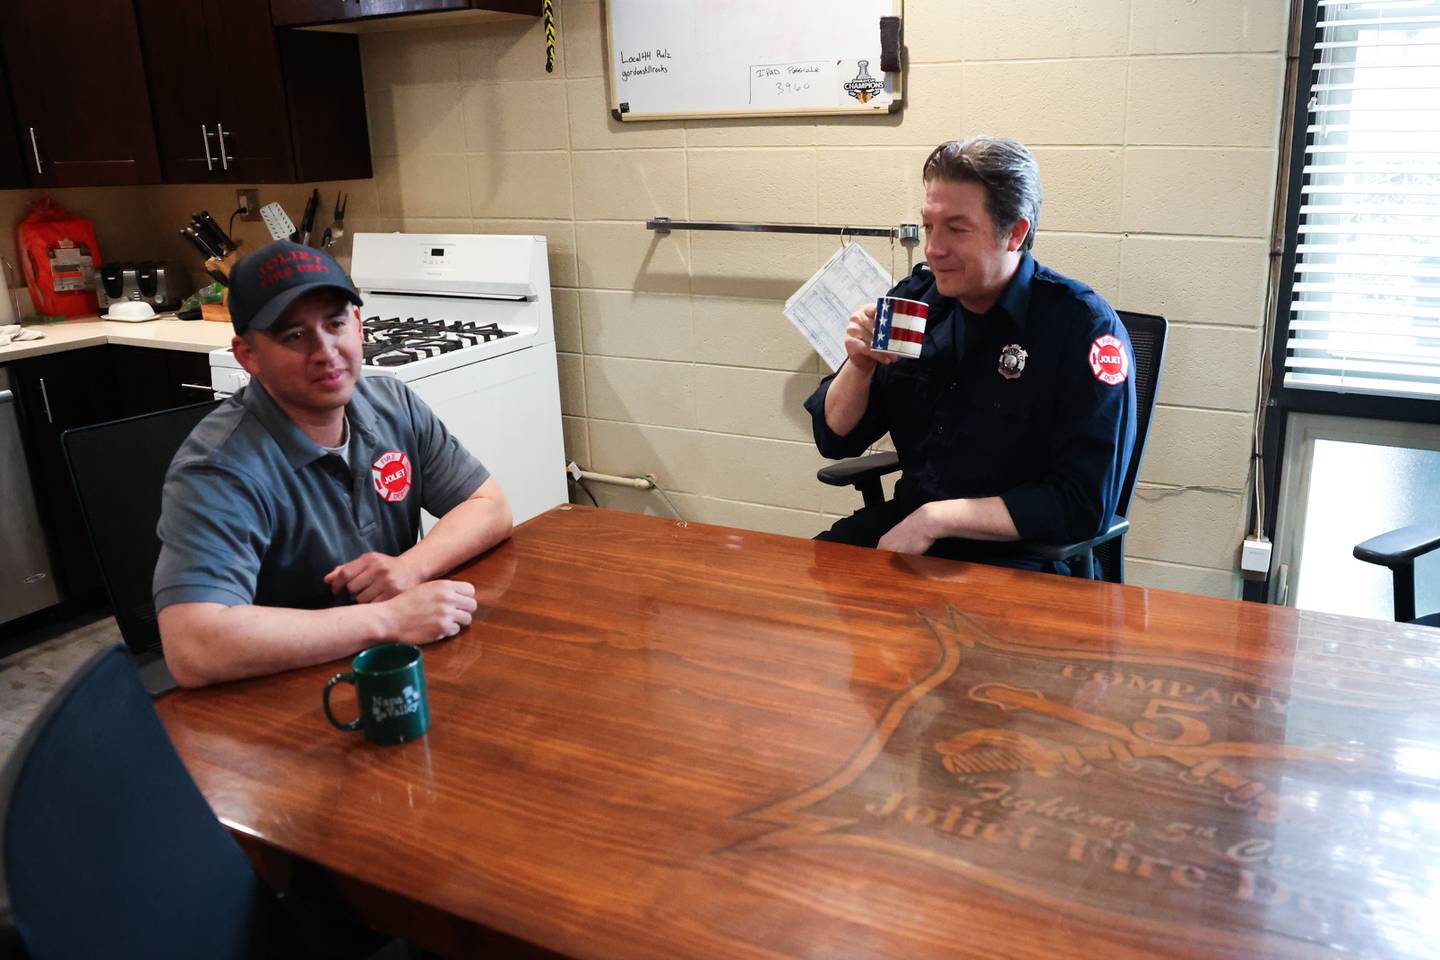 Joliet Firefighter Chris “coach” Kinsella, right, sits with fellow firefighter Aaron Aguirre on Thursday, April 11. Kinsella is the defensive line coach for Joliet Catholic’s football which earned him the nickname “coach” at the station.